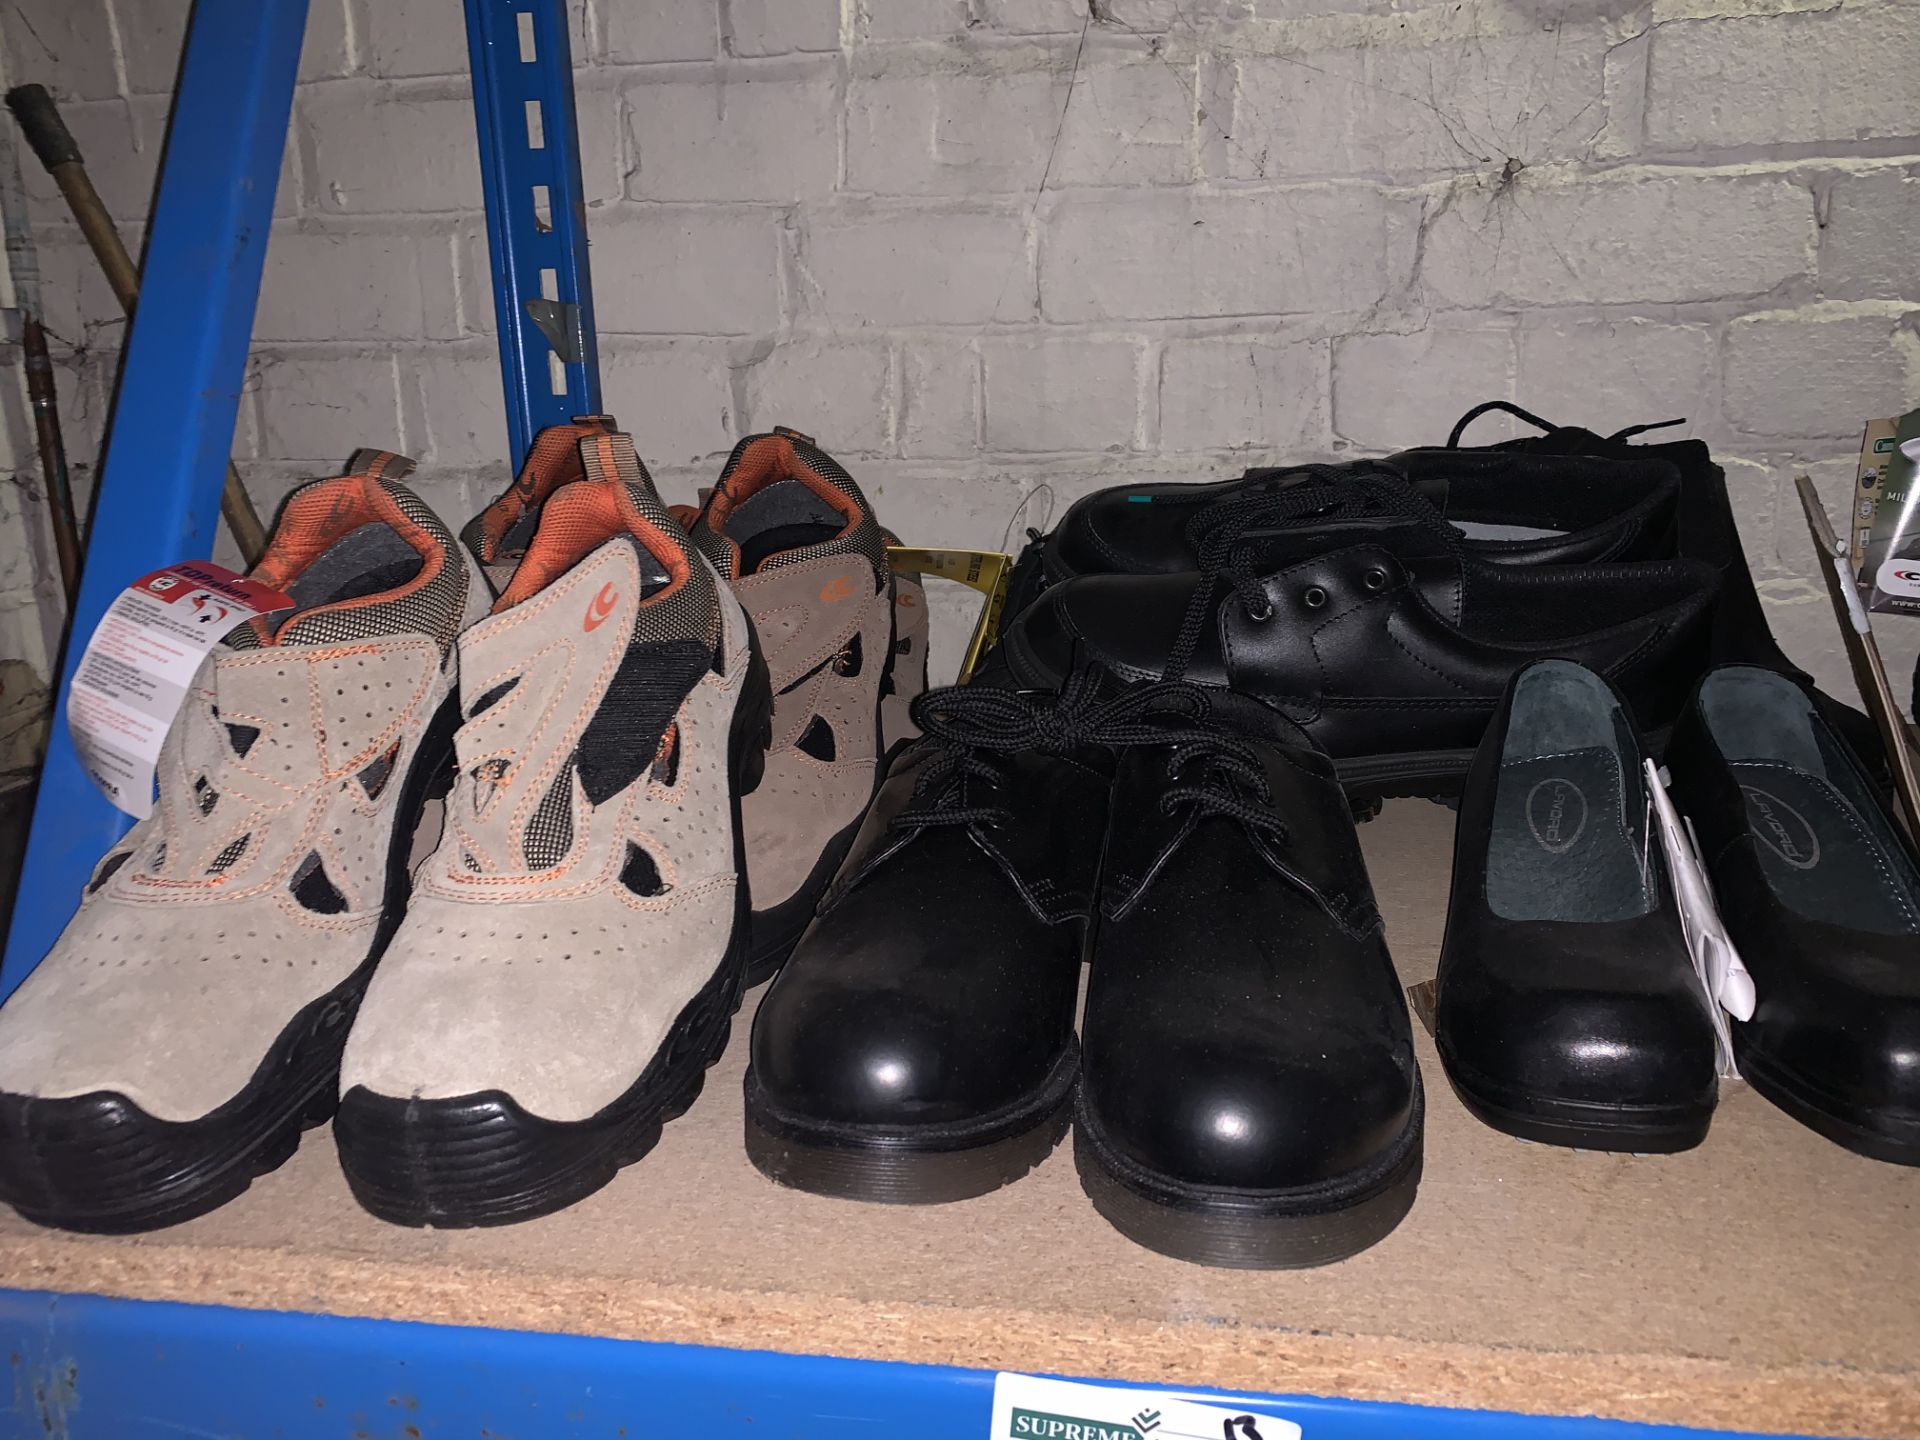 8 x PAIRS OF VARIOUS WORK SHOES/BOOTS TO INCLUDE COFRA, STERLING STEEL ETC IN VARIOUS ISZES